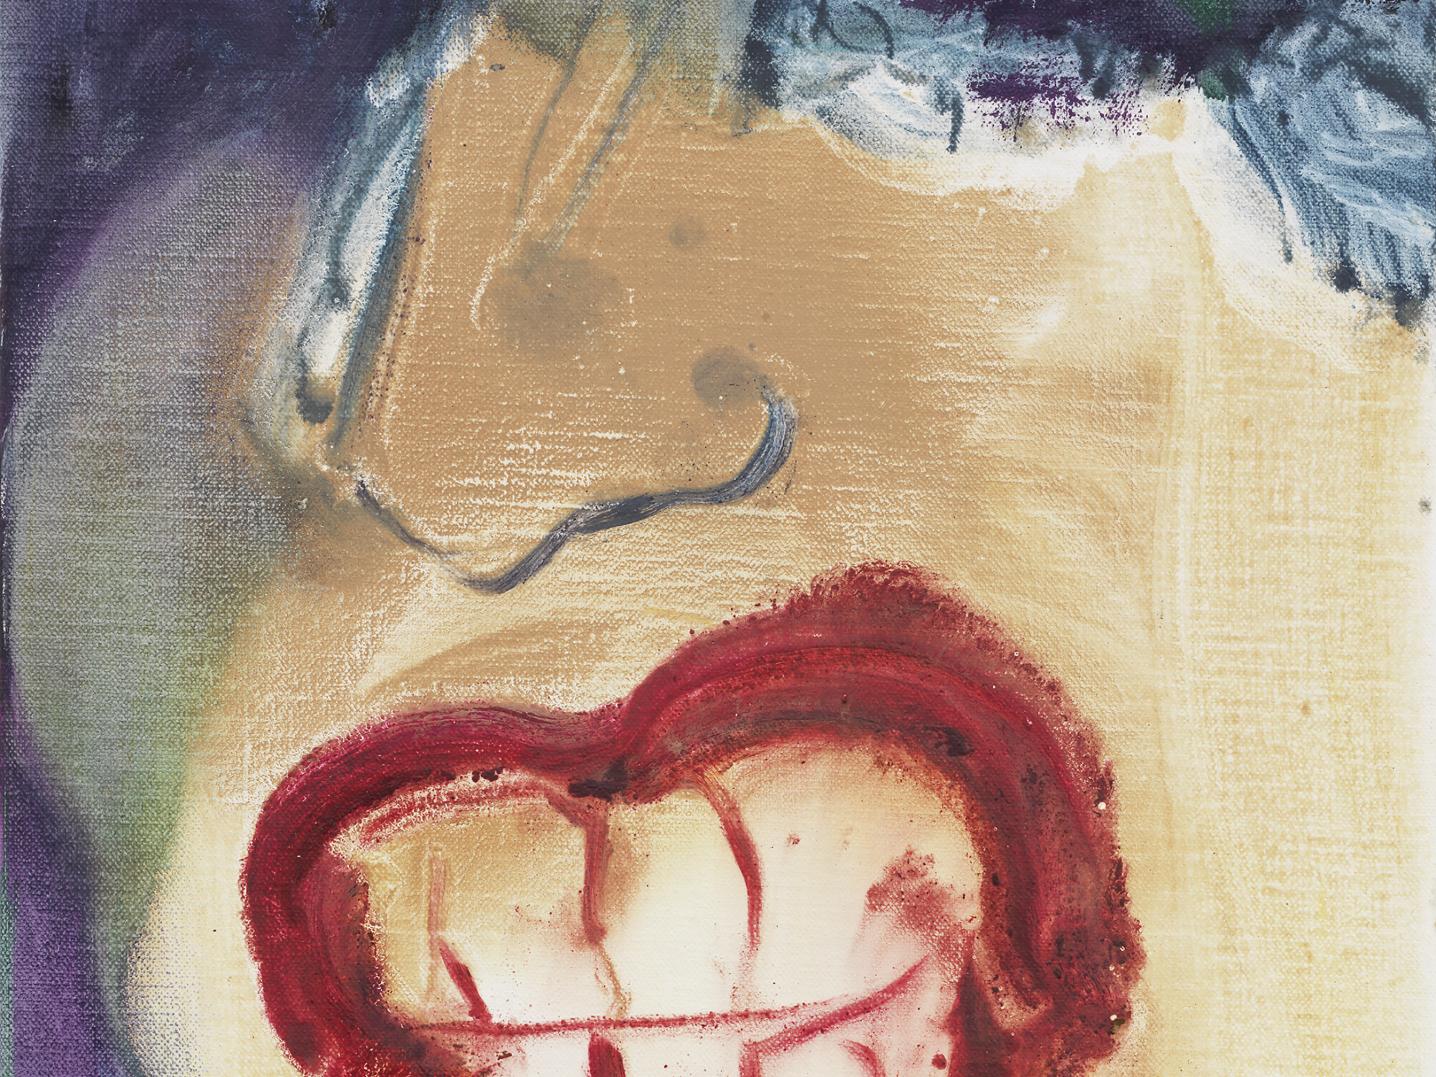 Marlene Dumas, Teeth, 2018. Oil on canvas, 40 x 30 cm. Private Collection, Madrid © Marlene Dumas. Courtesy the Artist and David Zwirner. Photo: Kerry McFate